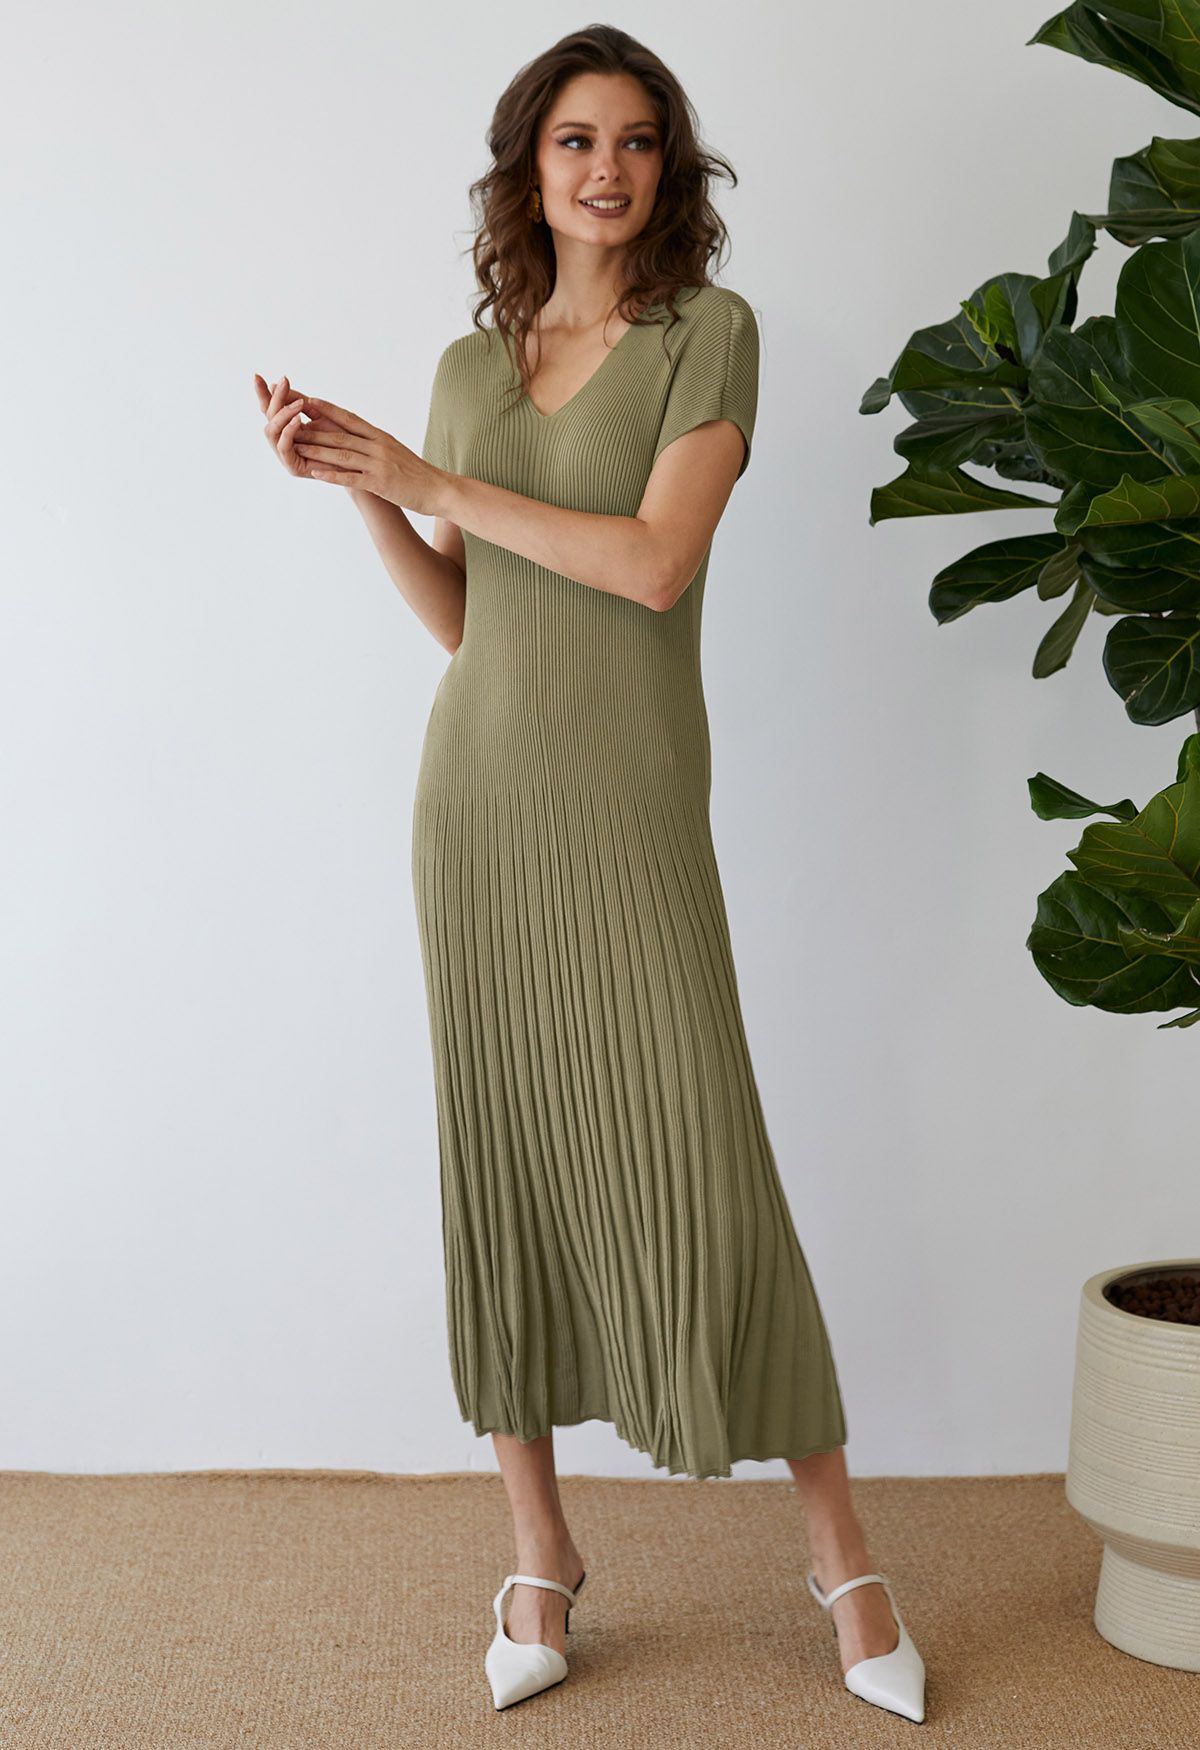 V-Neck Short-Sleeve Pleated Knit Dress in Olive